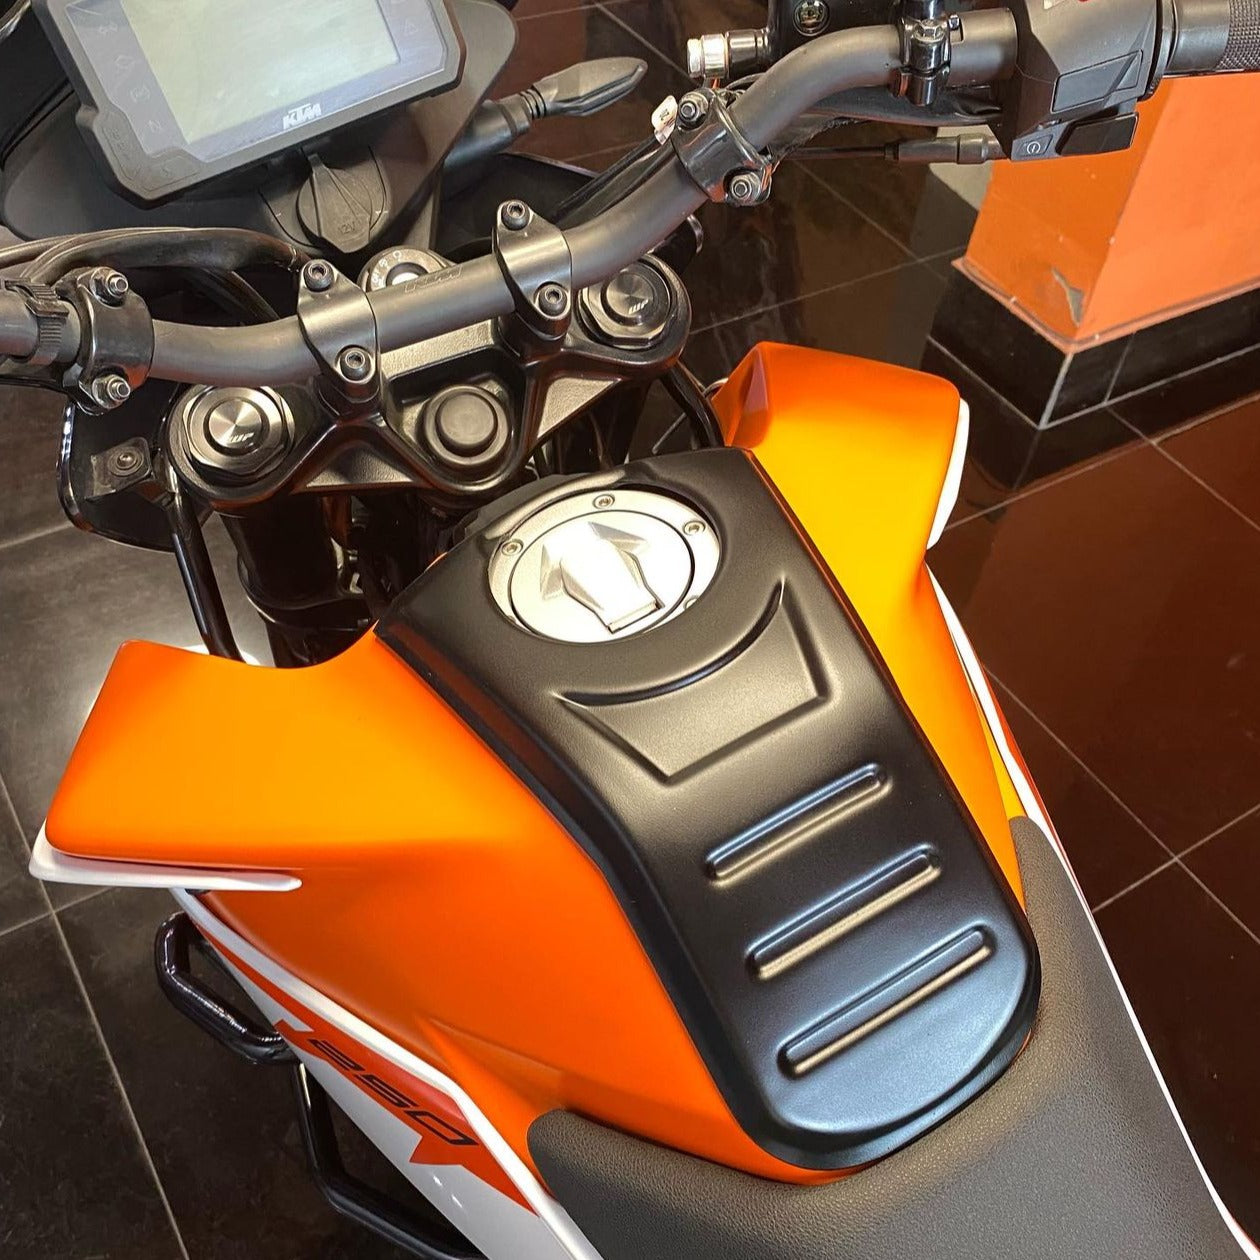 KTM Adventure Accessories | KTM Adv Accessories | KTM Adventure Tank Protection | Best Tank Pad Cover | Tank Scratch Protection | Modified Looks | Fits KTM Adventure | Saiga Parts Modification Accessories